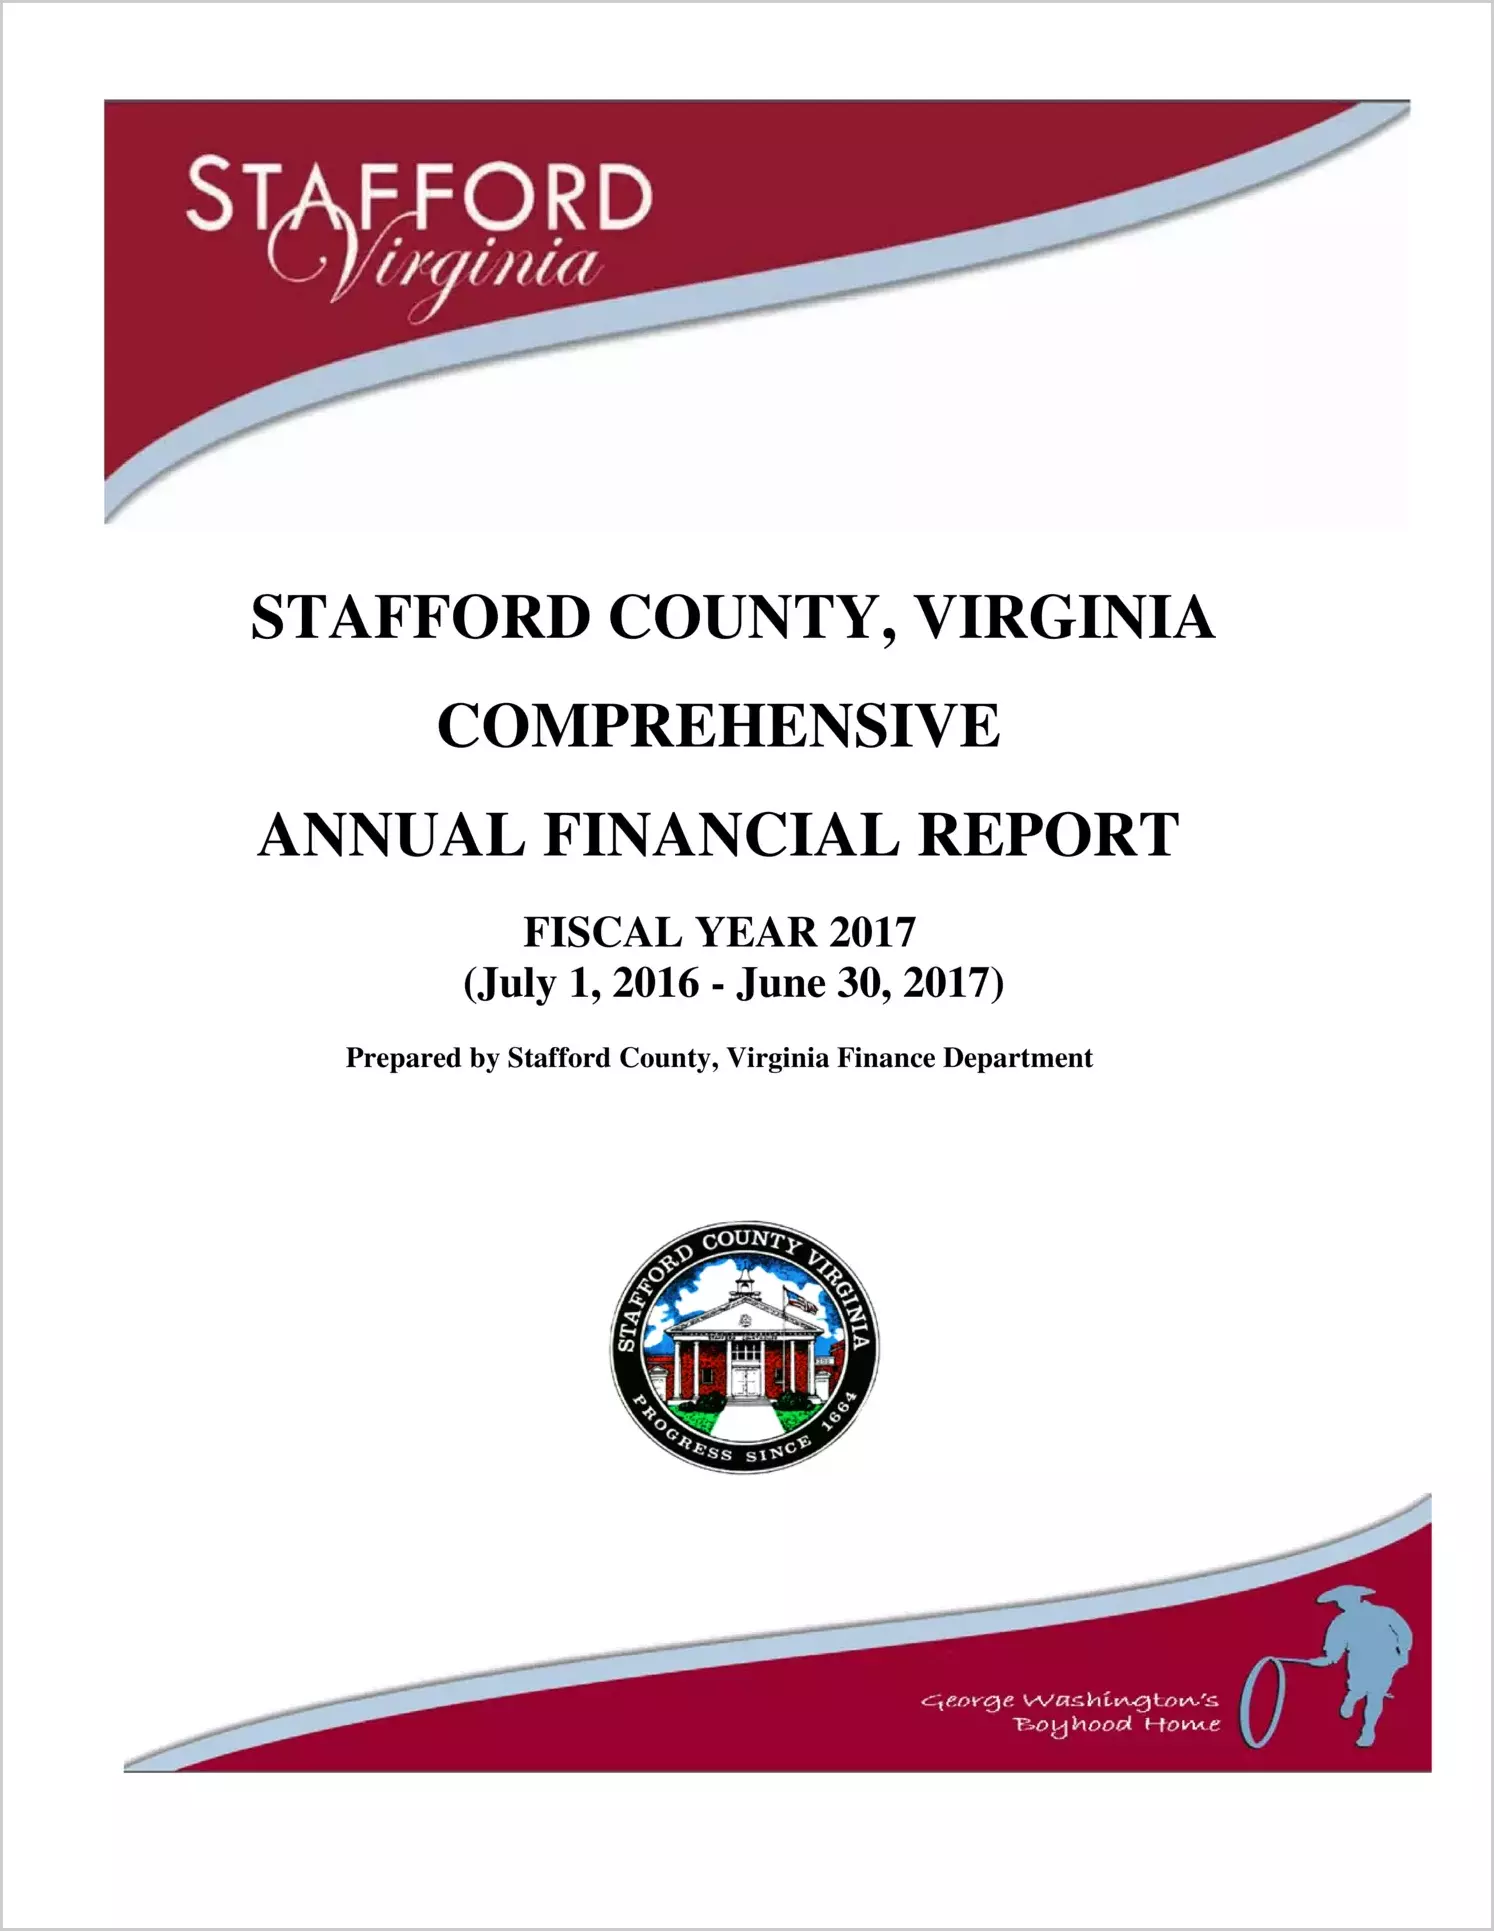 2017 Annual Financial Report for County of Stafford